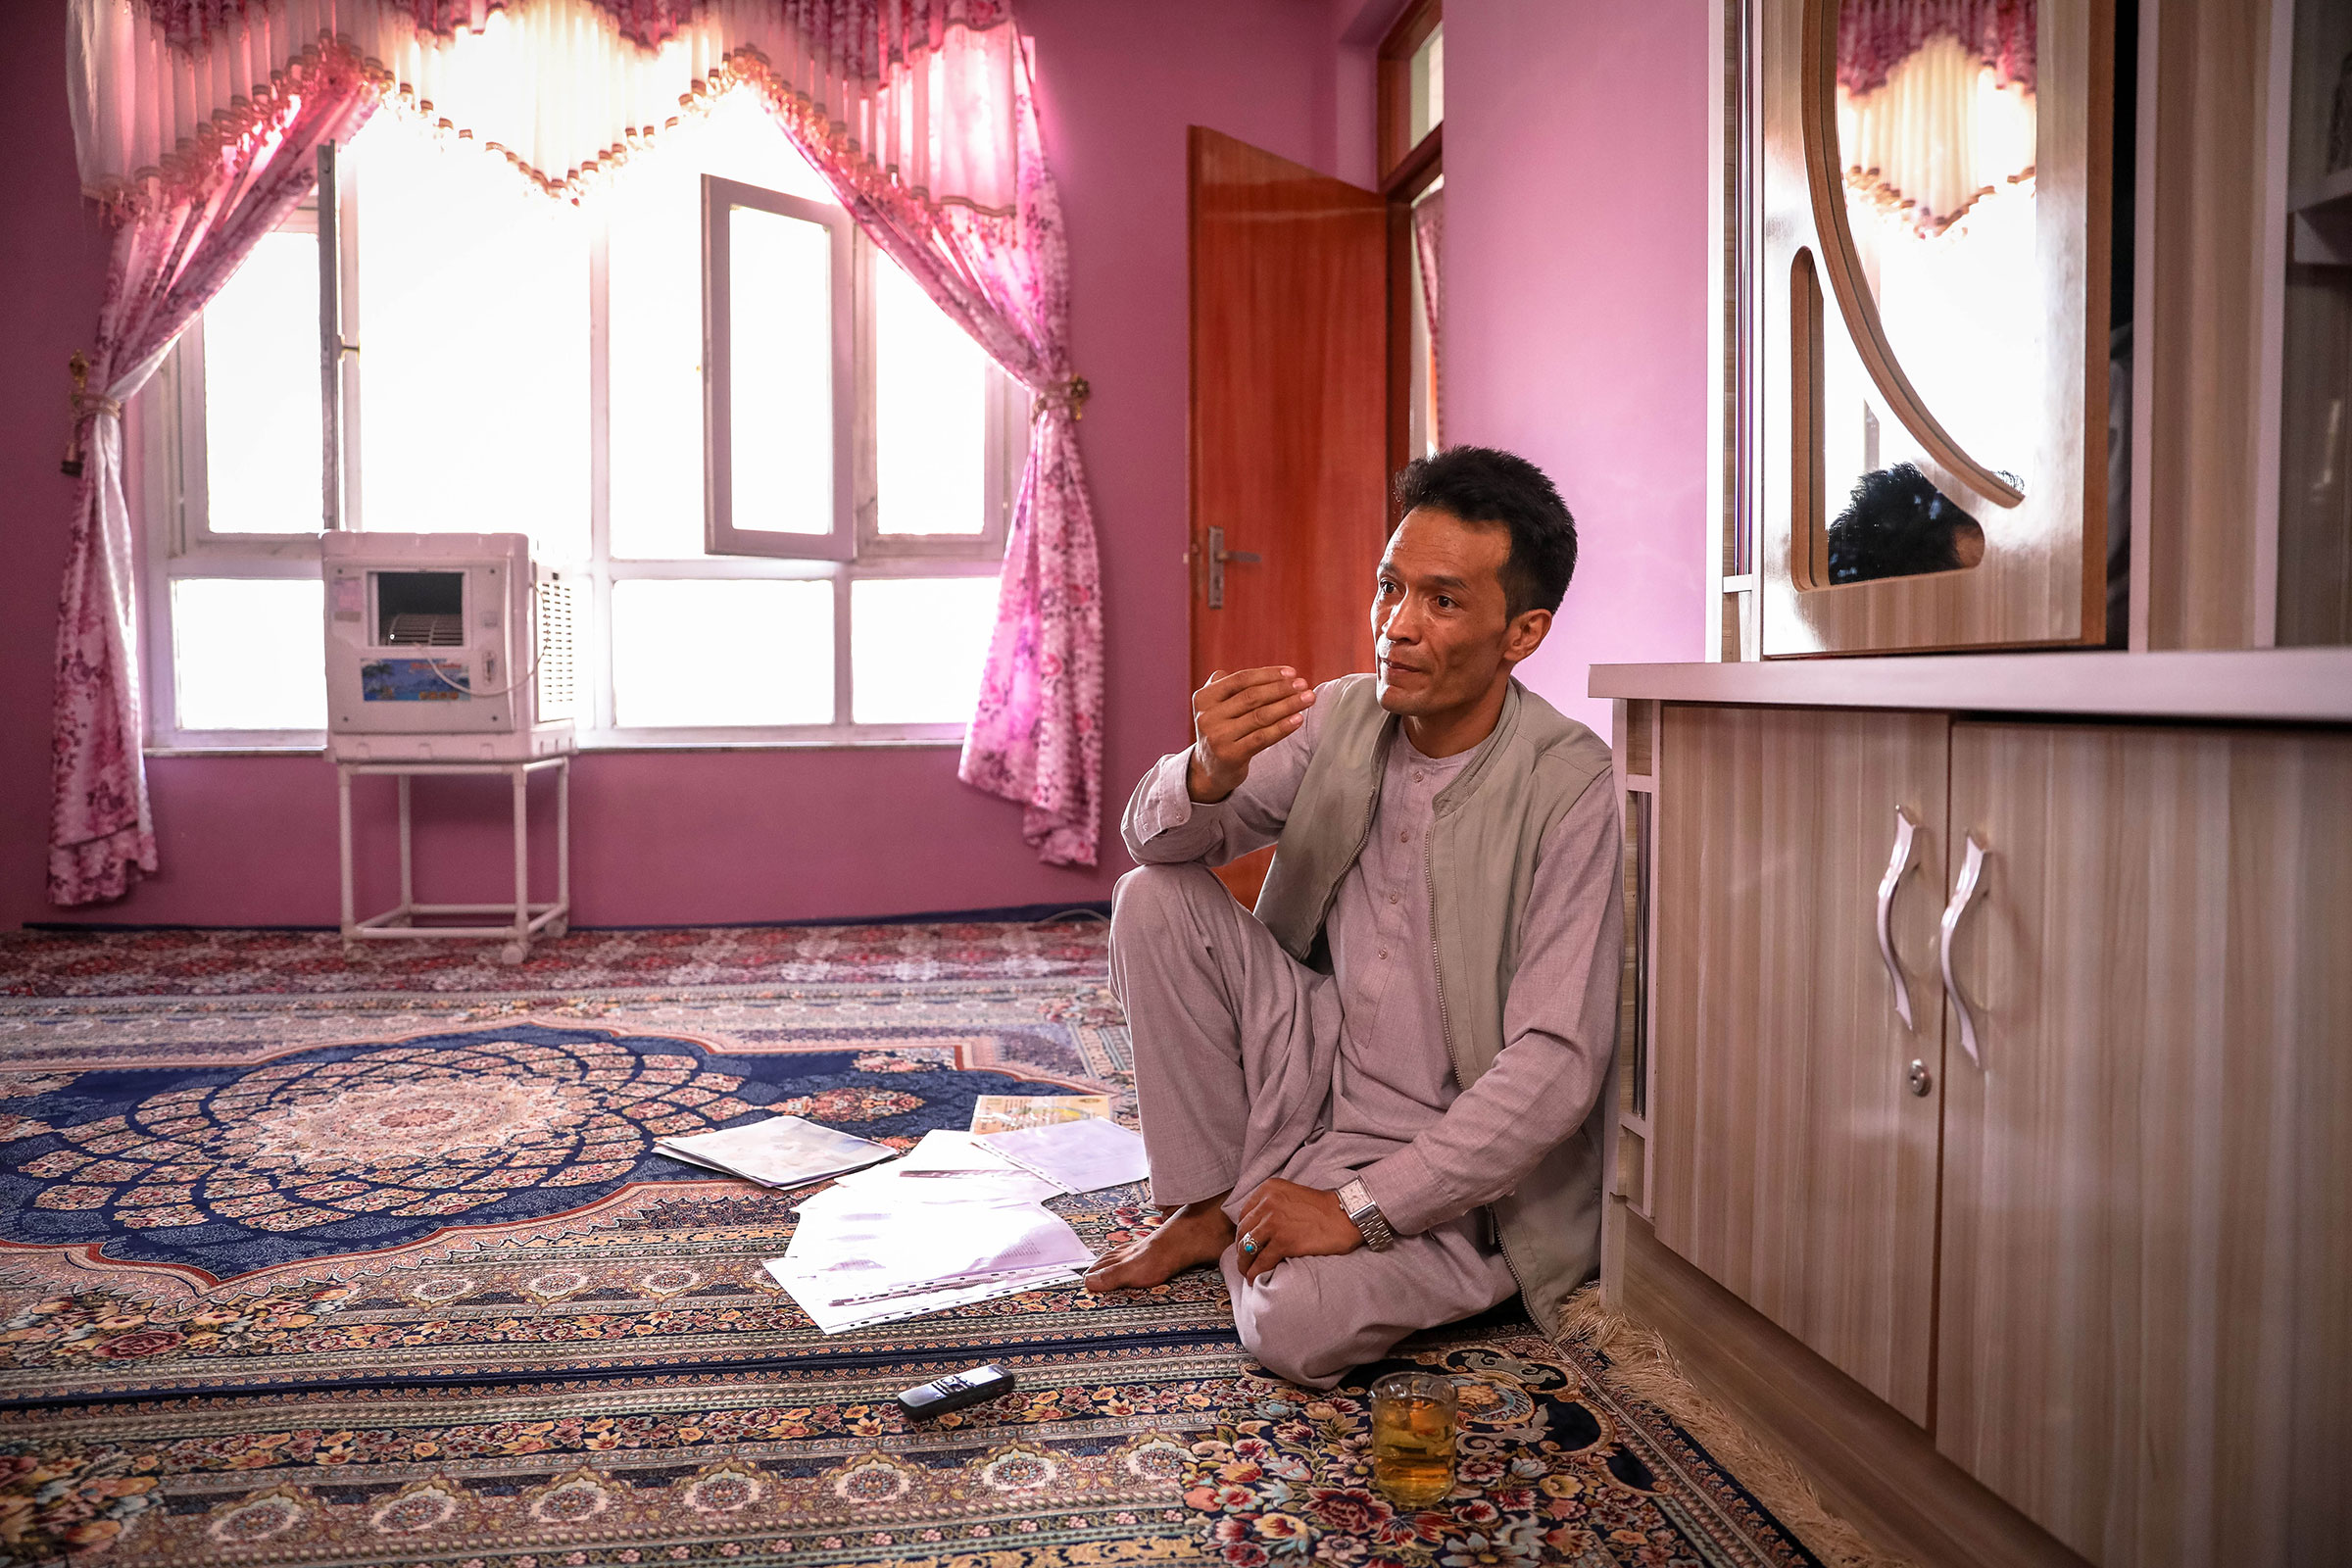 Abdul Rashid Shirzad, a former interpreter for the U.S. forces at his house in Kabul, Afghanistan, June 10, 2021. Thousands of Afghan interpreters and other employees of the U.S. forces were denied Special Immigration Visas (SIVs) by the U.S. government. (Copyright (c) 2021 Shutterstock. No use without permission.)